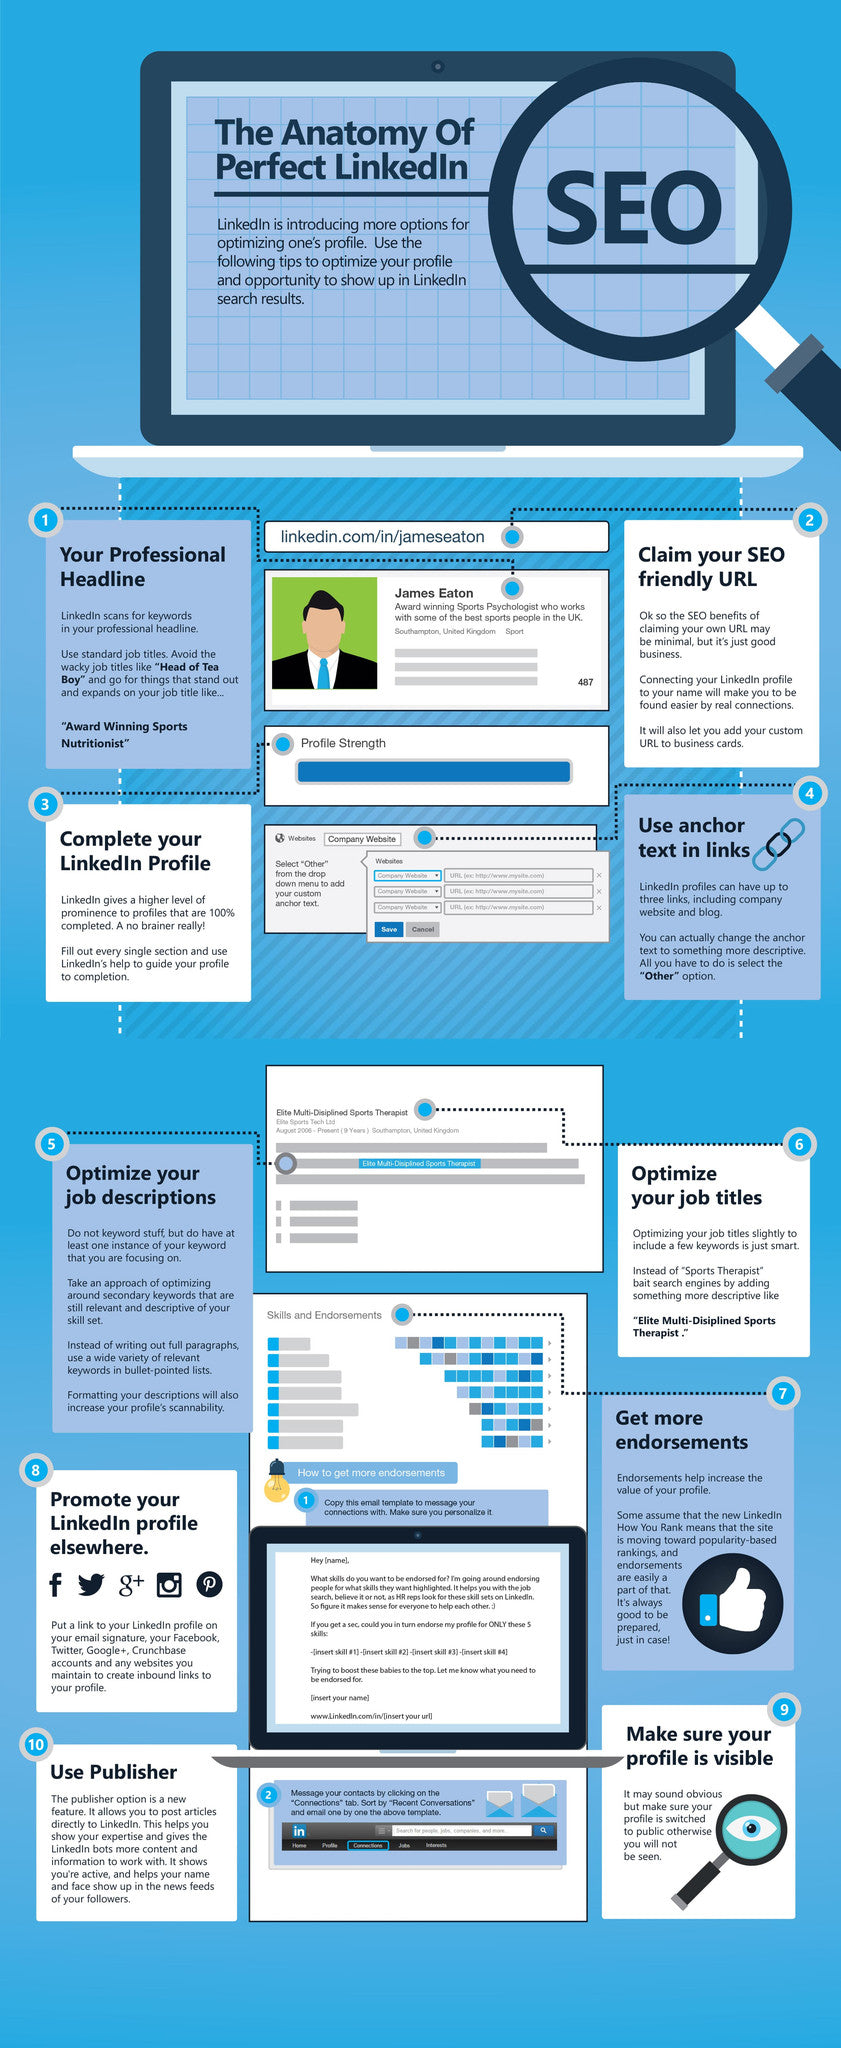 how to optimize your linkedin profile